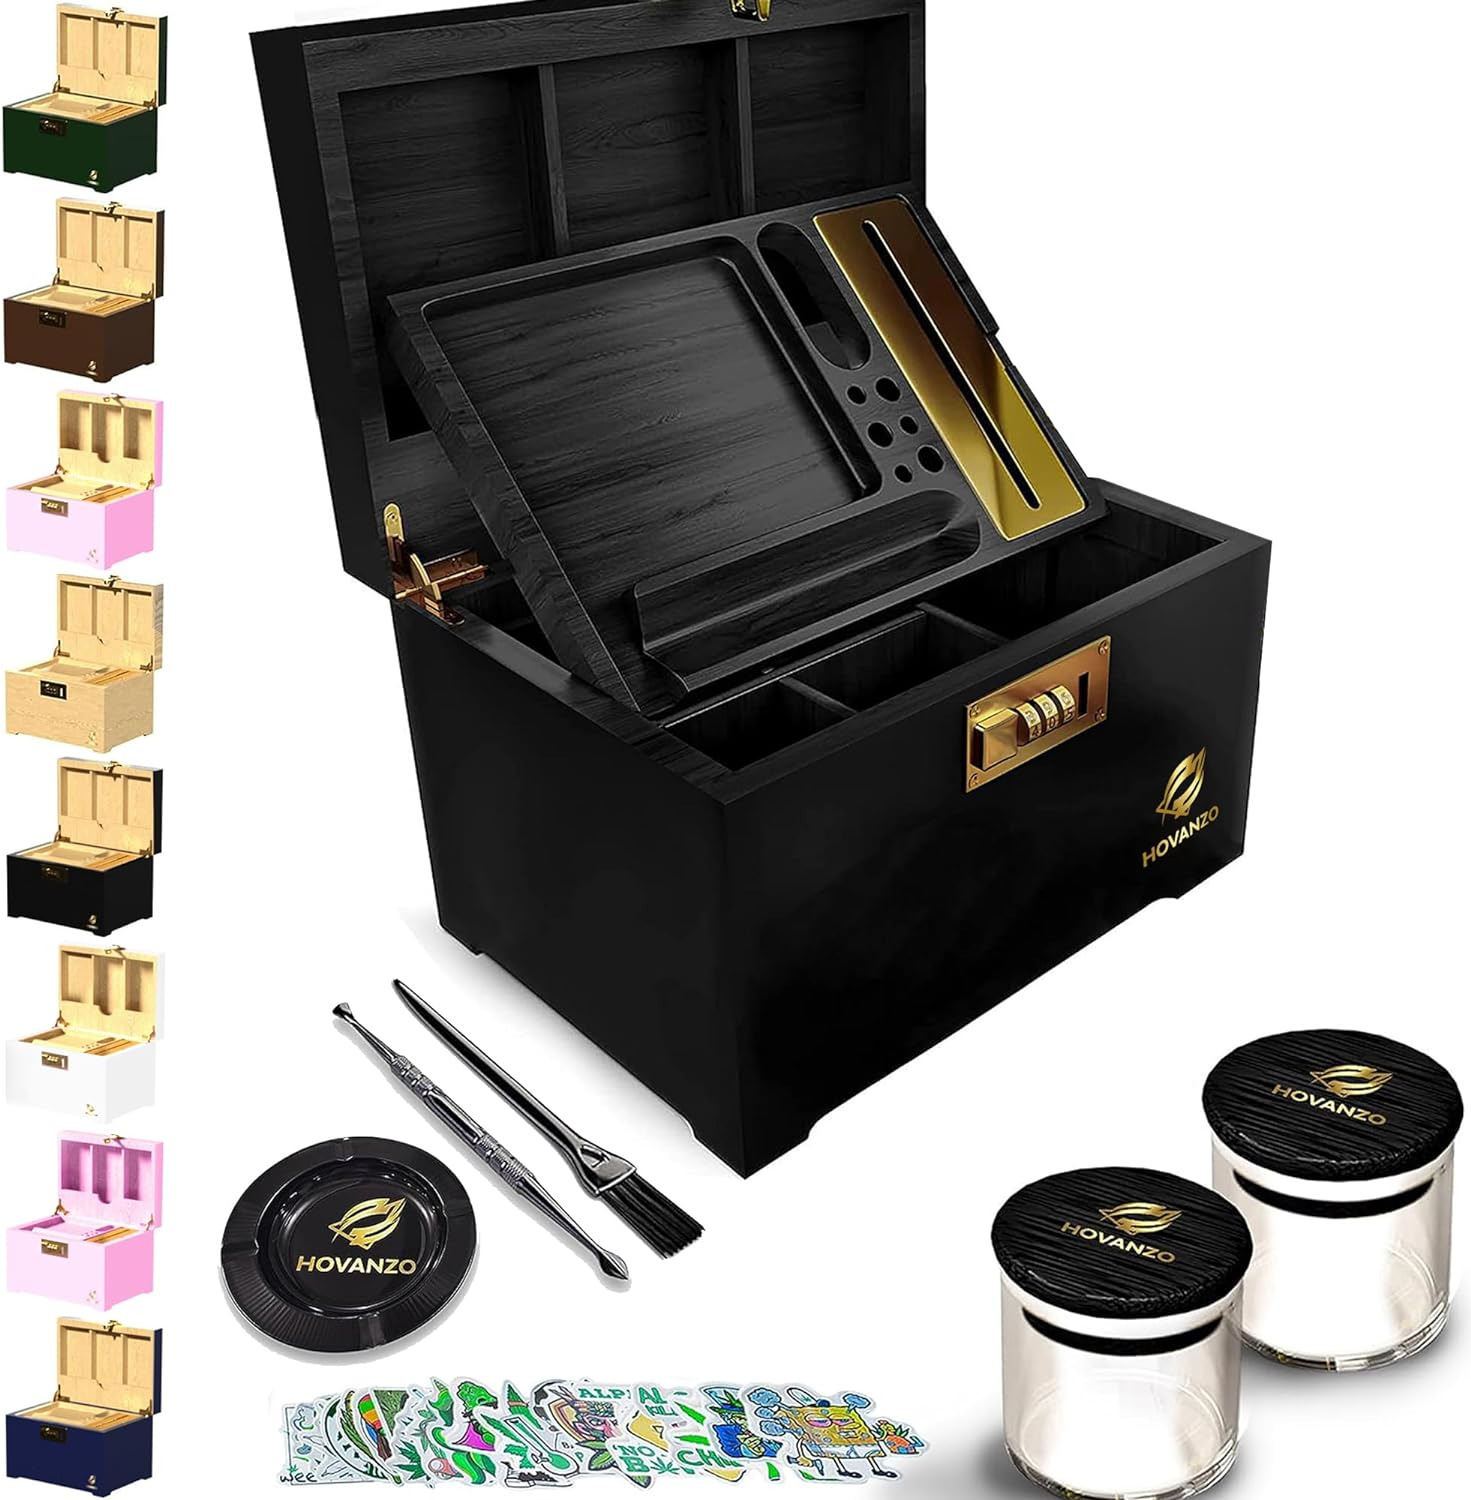 Premium Large Stash Box - Smell Proof Stash Box with Rolling Tray - Storage